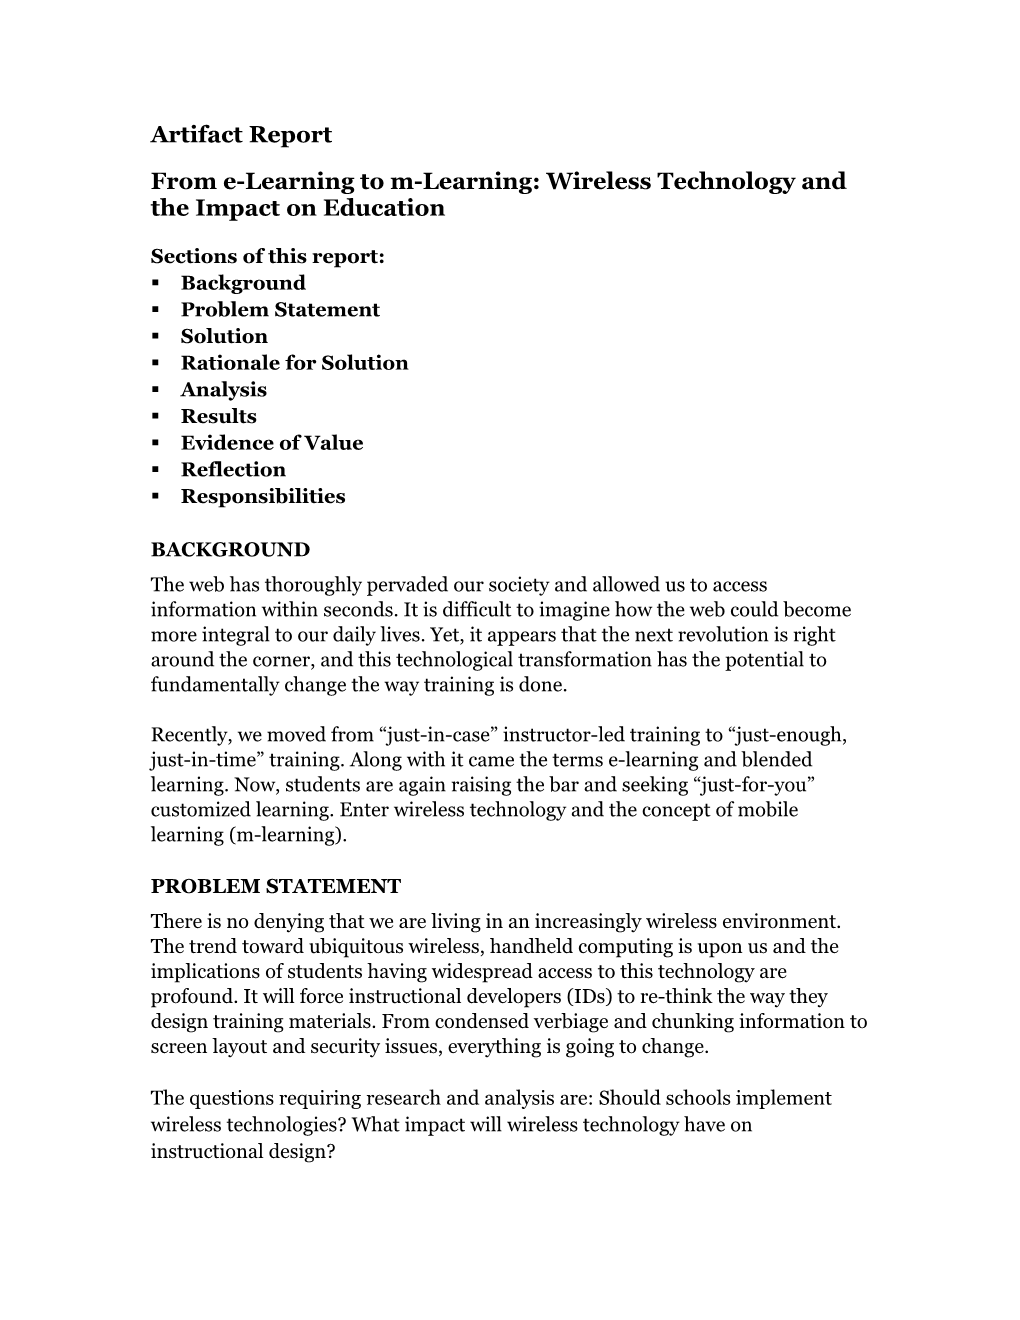 From E-Learning to M-Learning: Wireless Technology and the Impact on Education